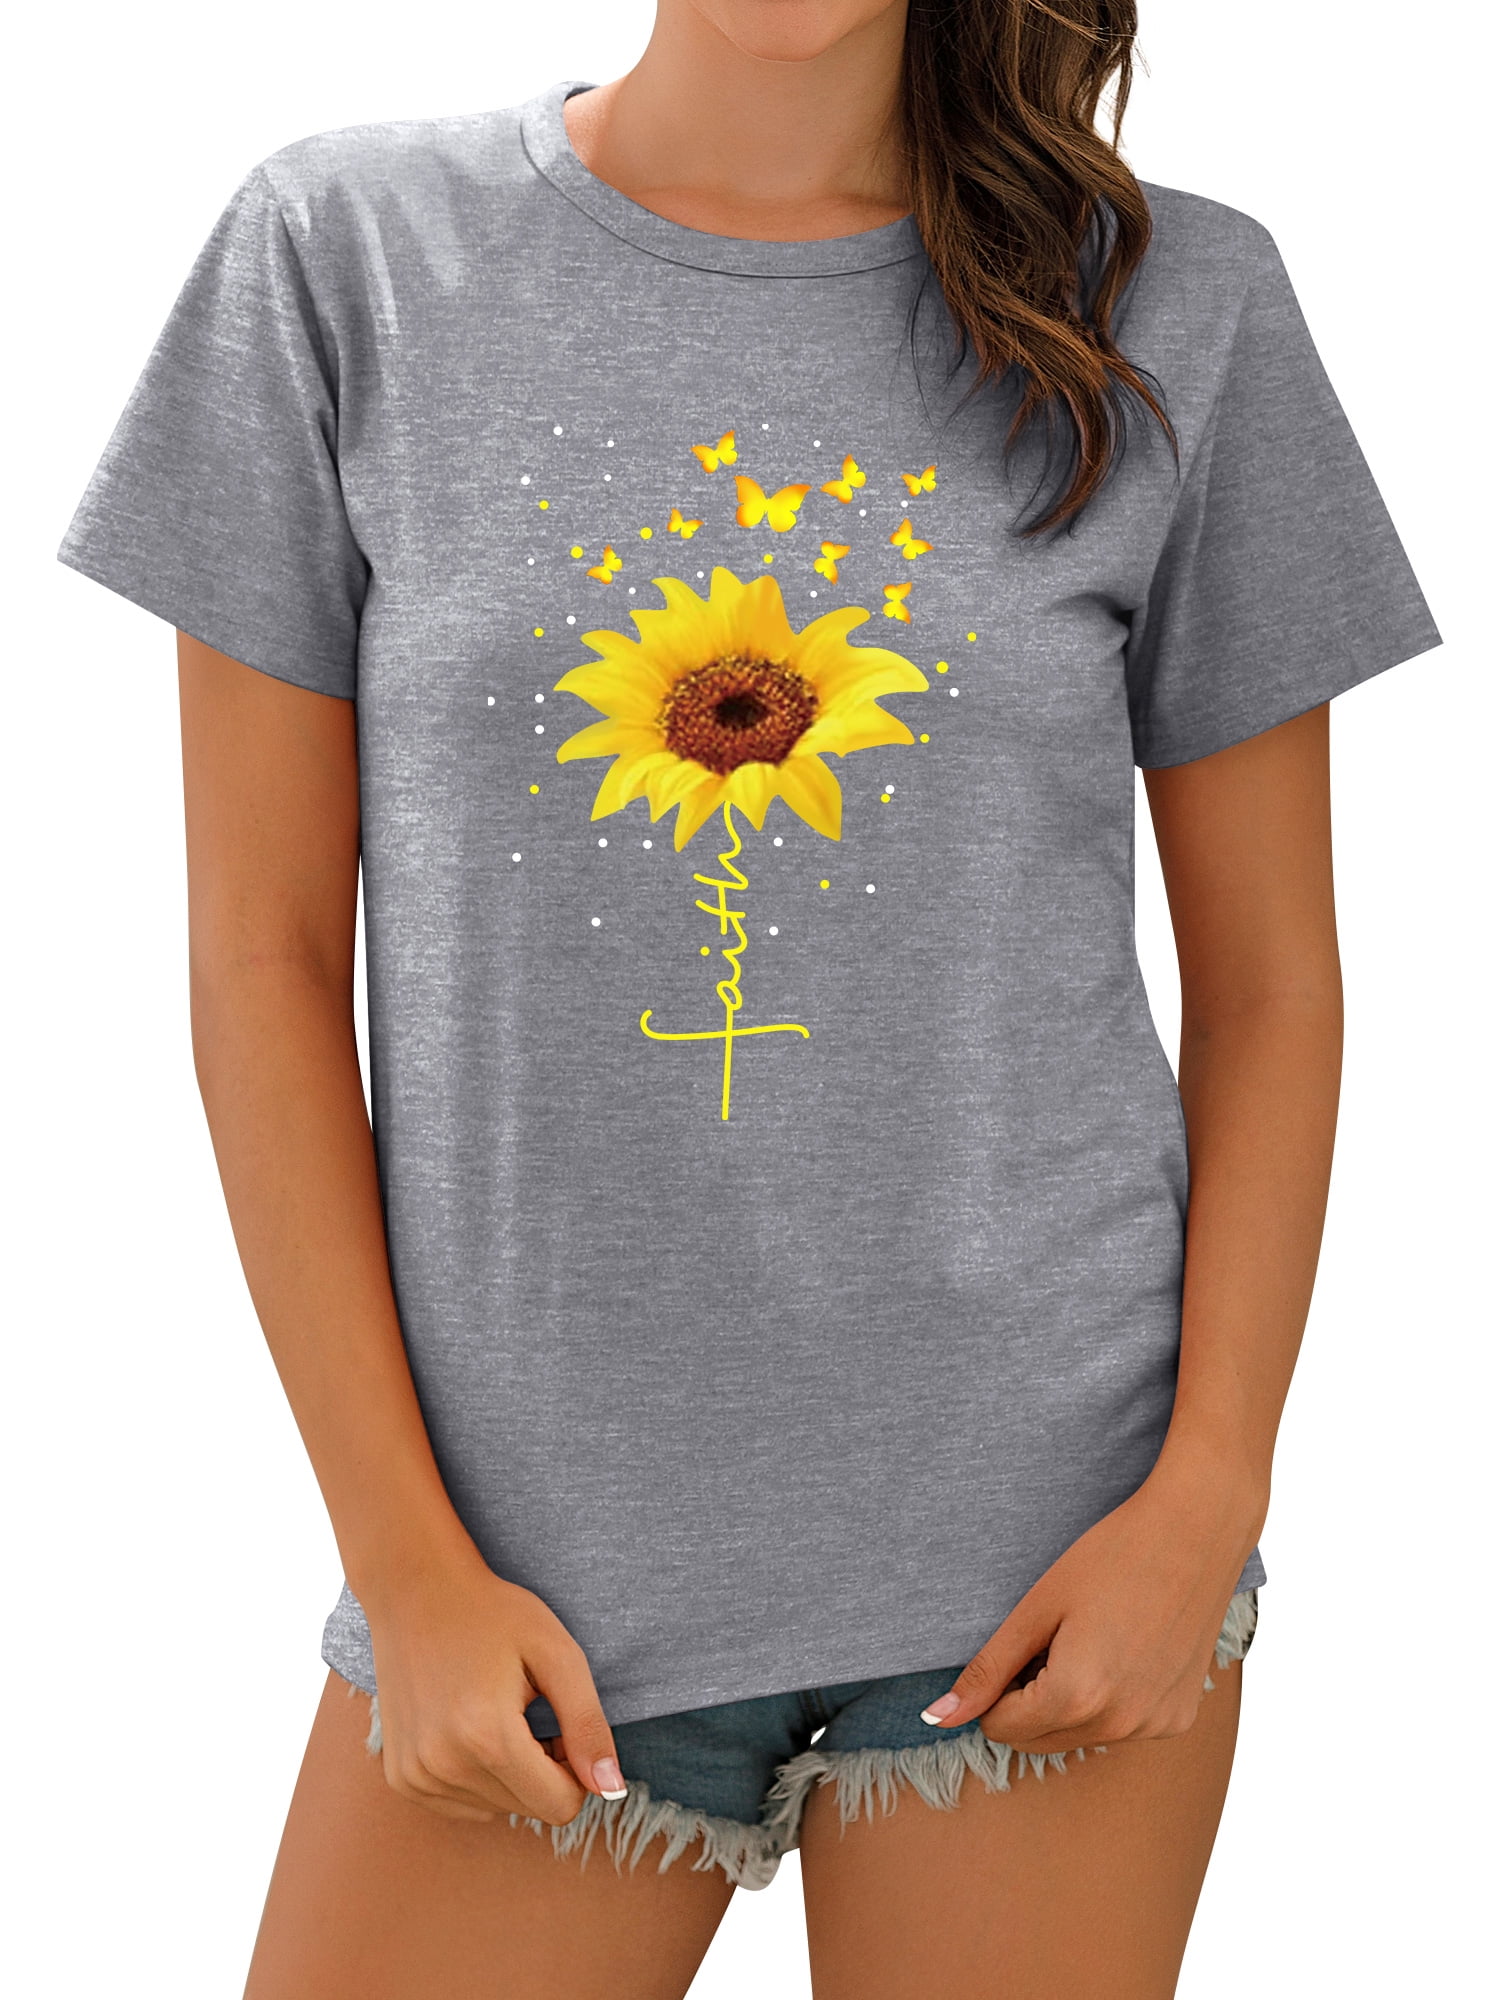 Womens Solid Color Short Sleeve Letter Sunflower Butterfly Graphic Casual Tops Tees Pullover T Shirt for Teen Girls